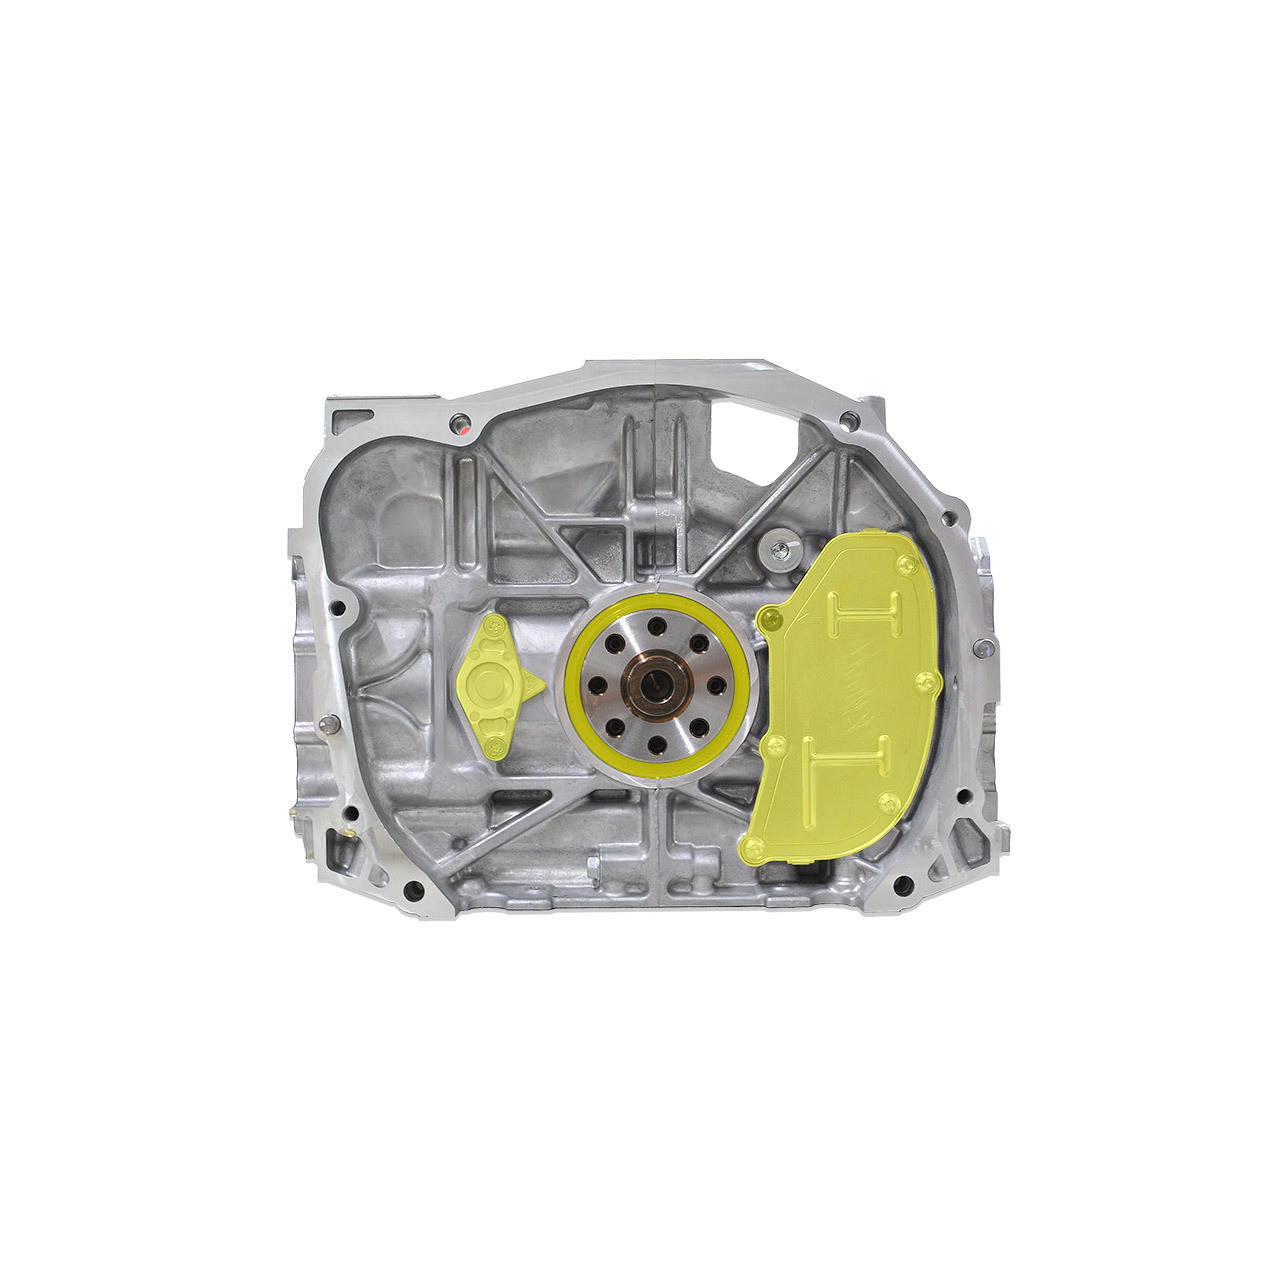 IAG 550 2.5L Subaru Short Block Rear Cover and Seal Location for WRX, STI, Legacy GT, Forester XT